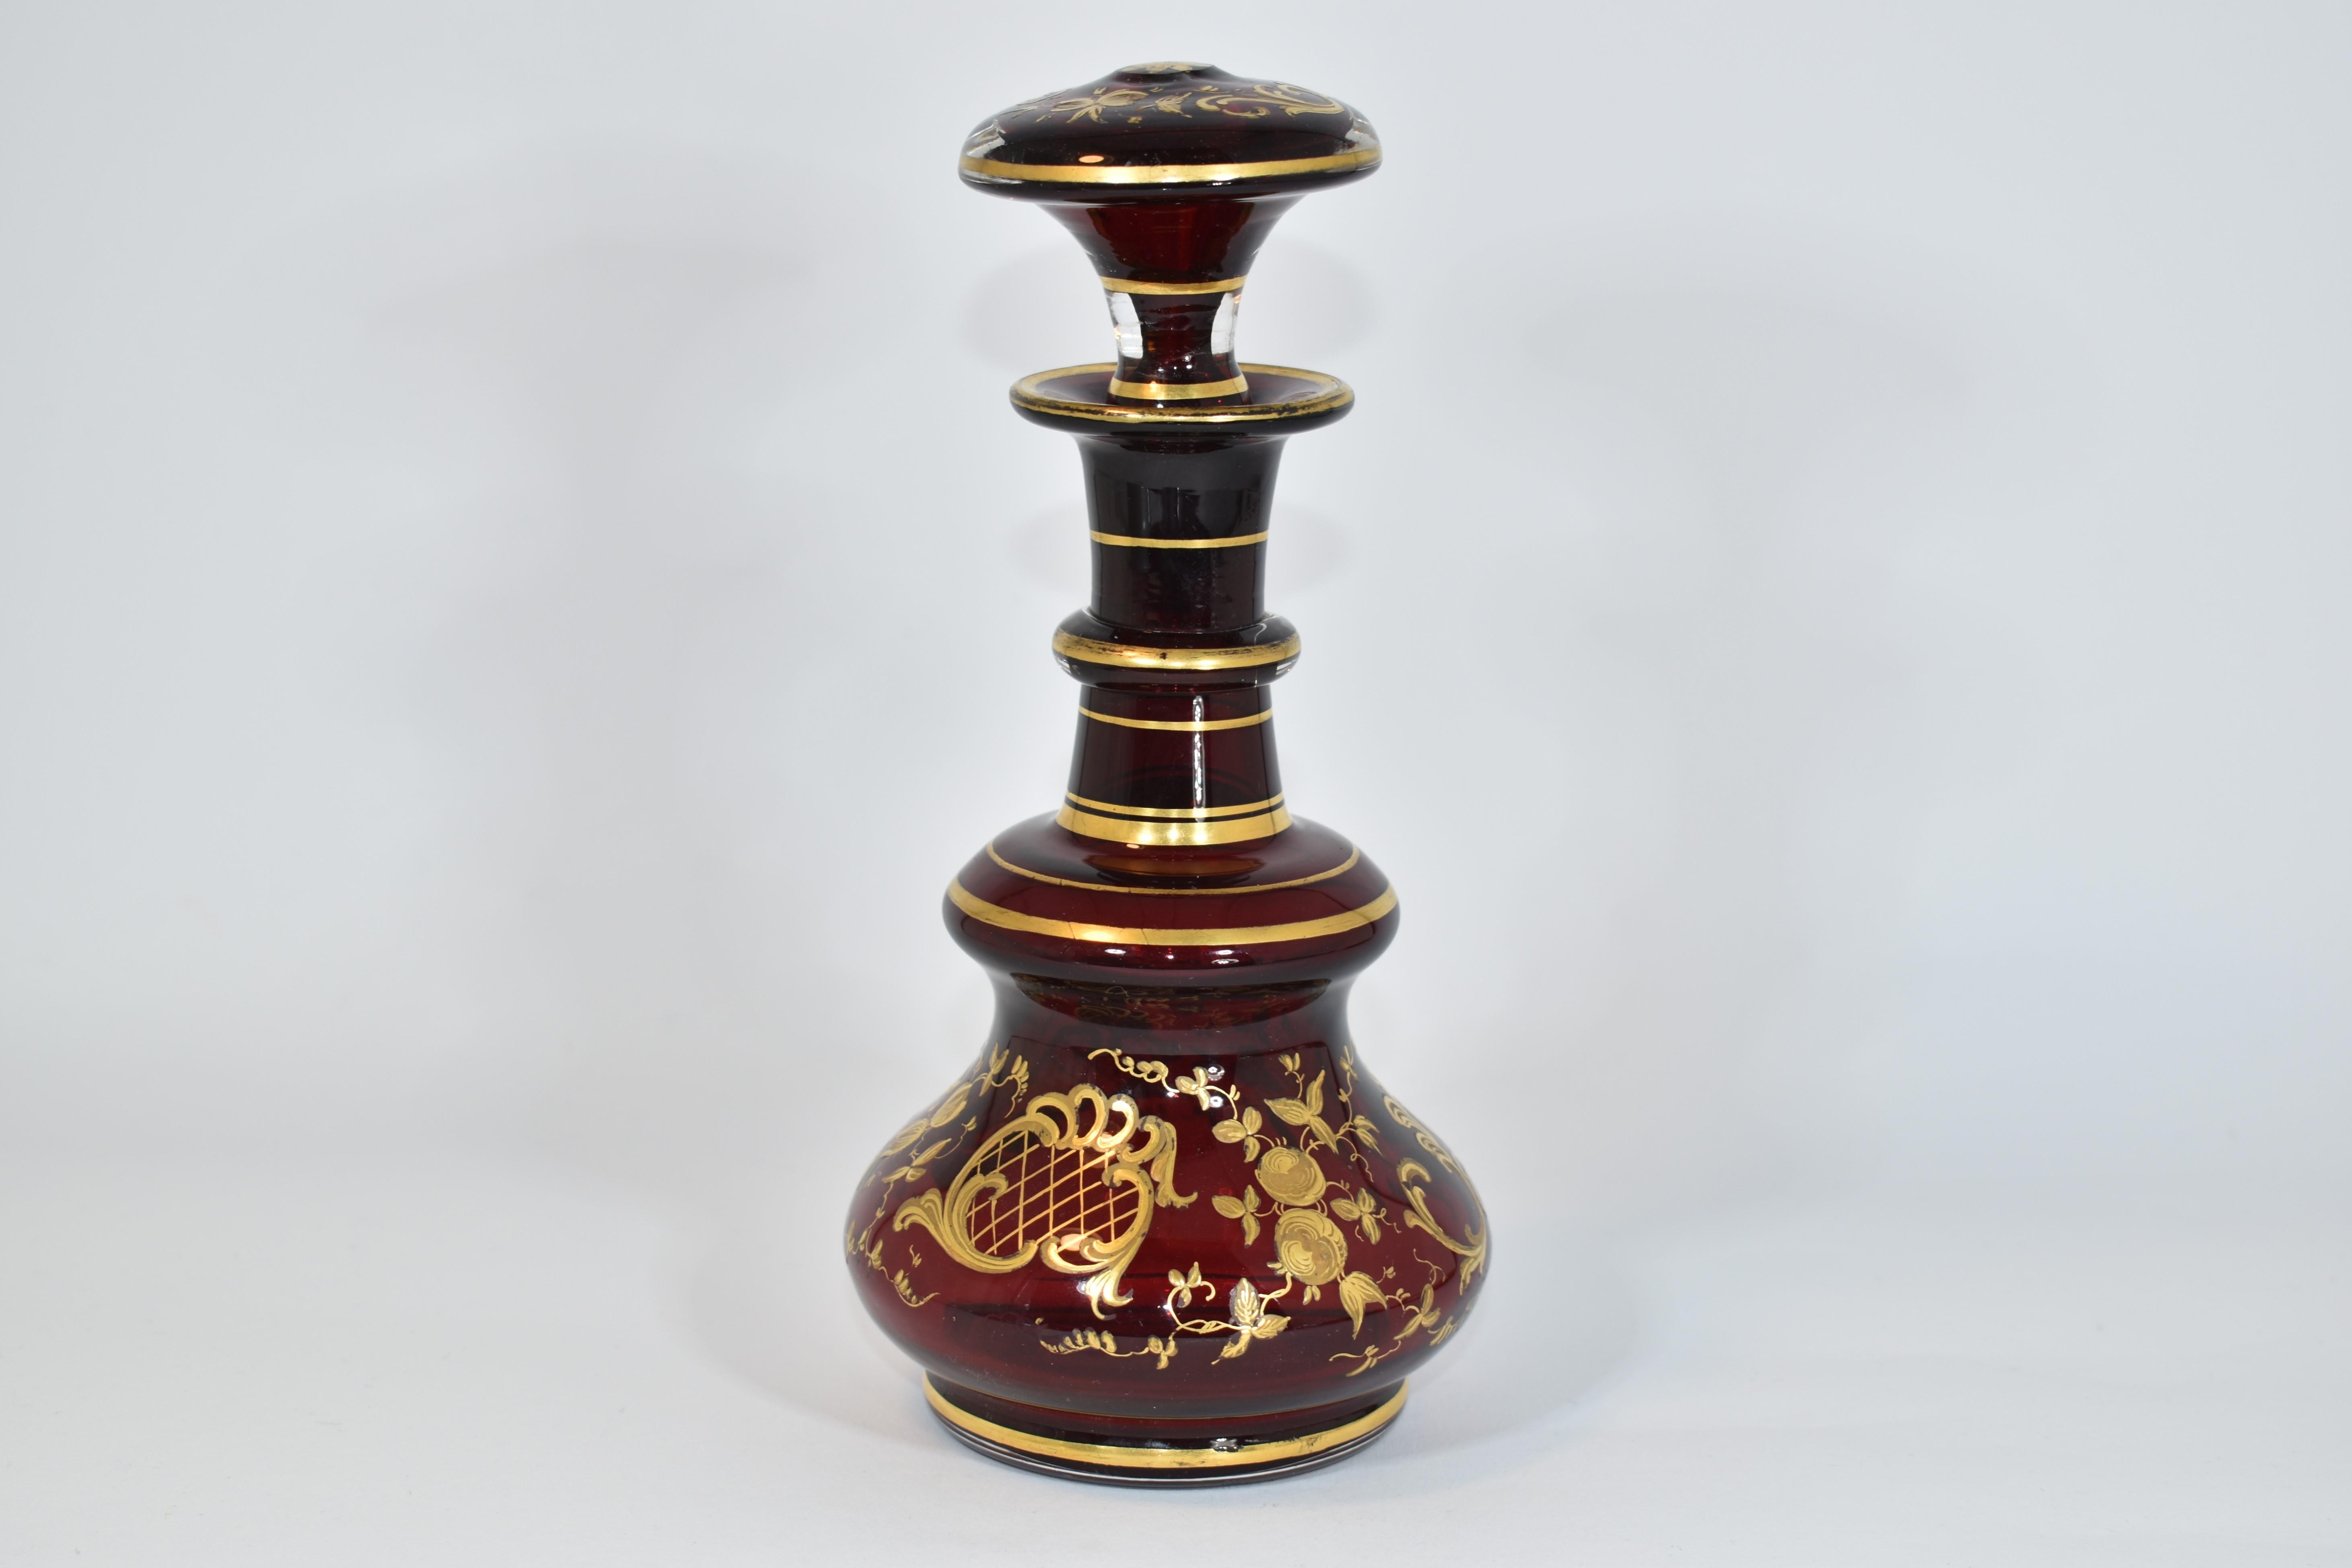 Atique perfume bottle (flacon) in ruby red blown glass, decorated all around with gilded enamel scrollworks and flowers
further gilding on the neck and stopper
Bohemia, 19th Century.